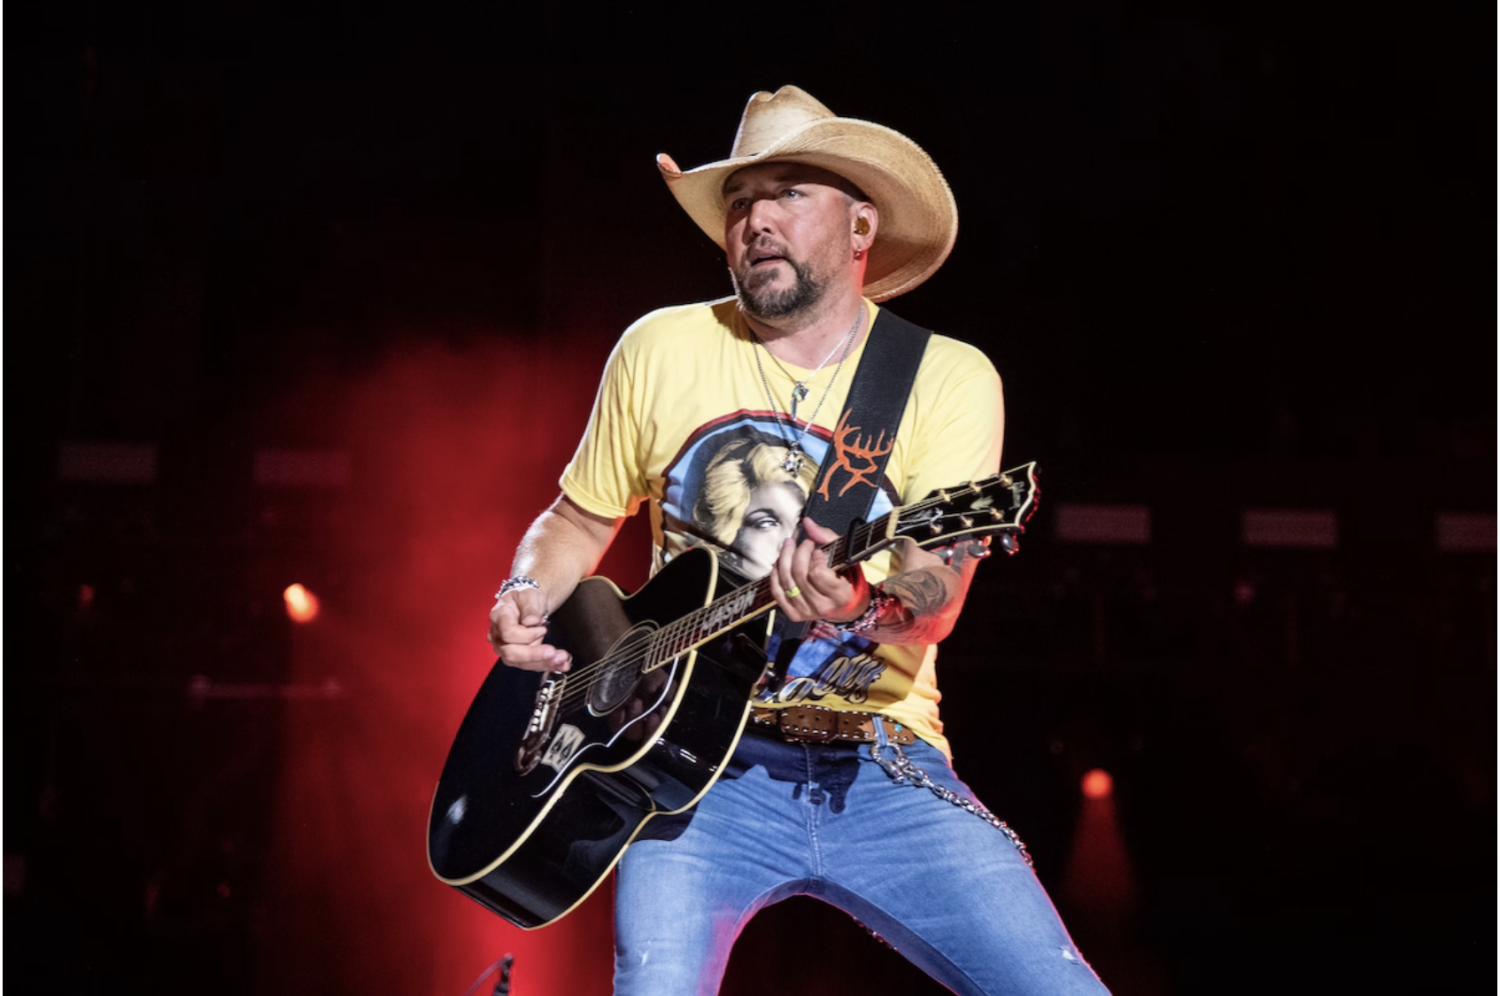 Jason Aldean performs at last year's CMA Fest in Nashville. (Amy Harris/Invision/AP, File)